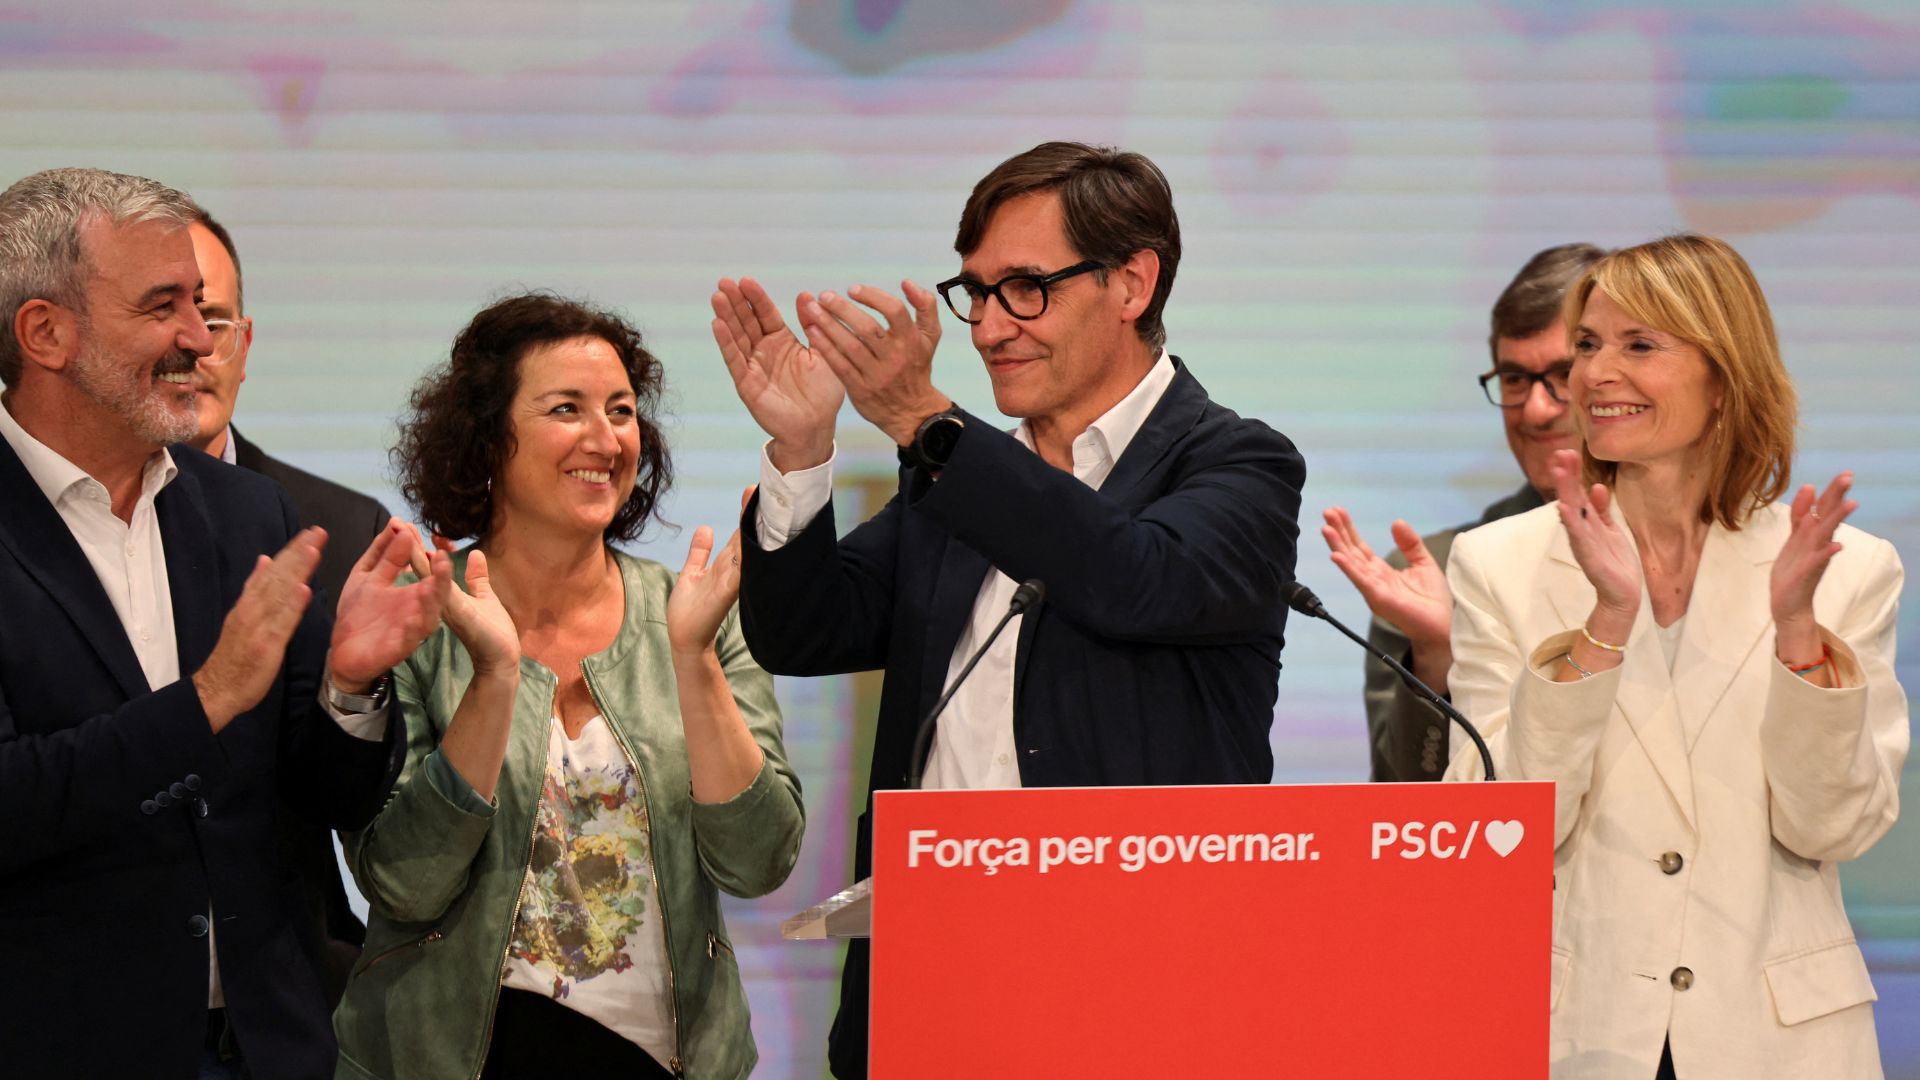 Socialist Party of Catalonia (PSC) candidate Salvador Illa applauds supporters in Barcelona. /Nacho Doce/Reuters
